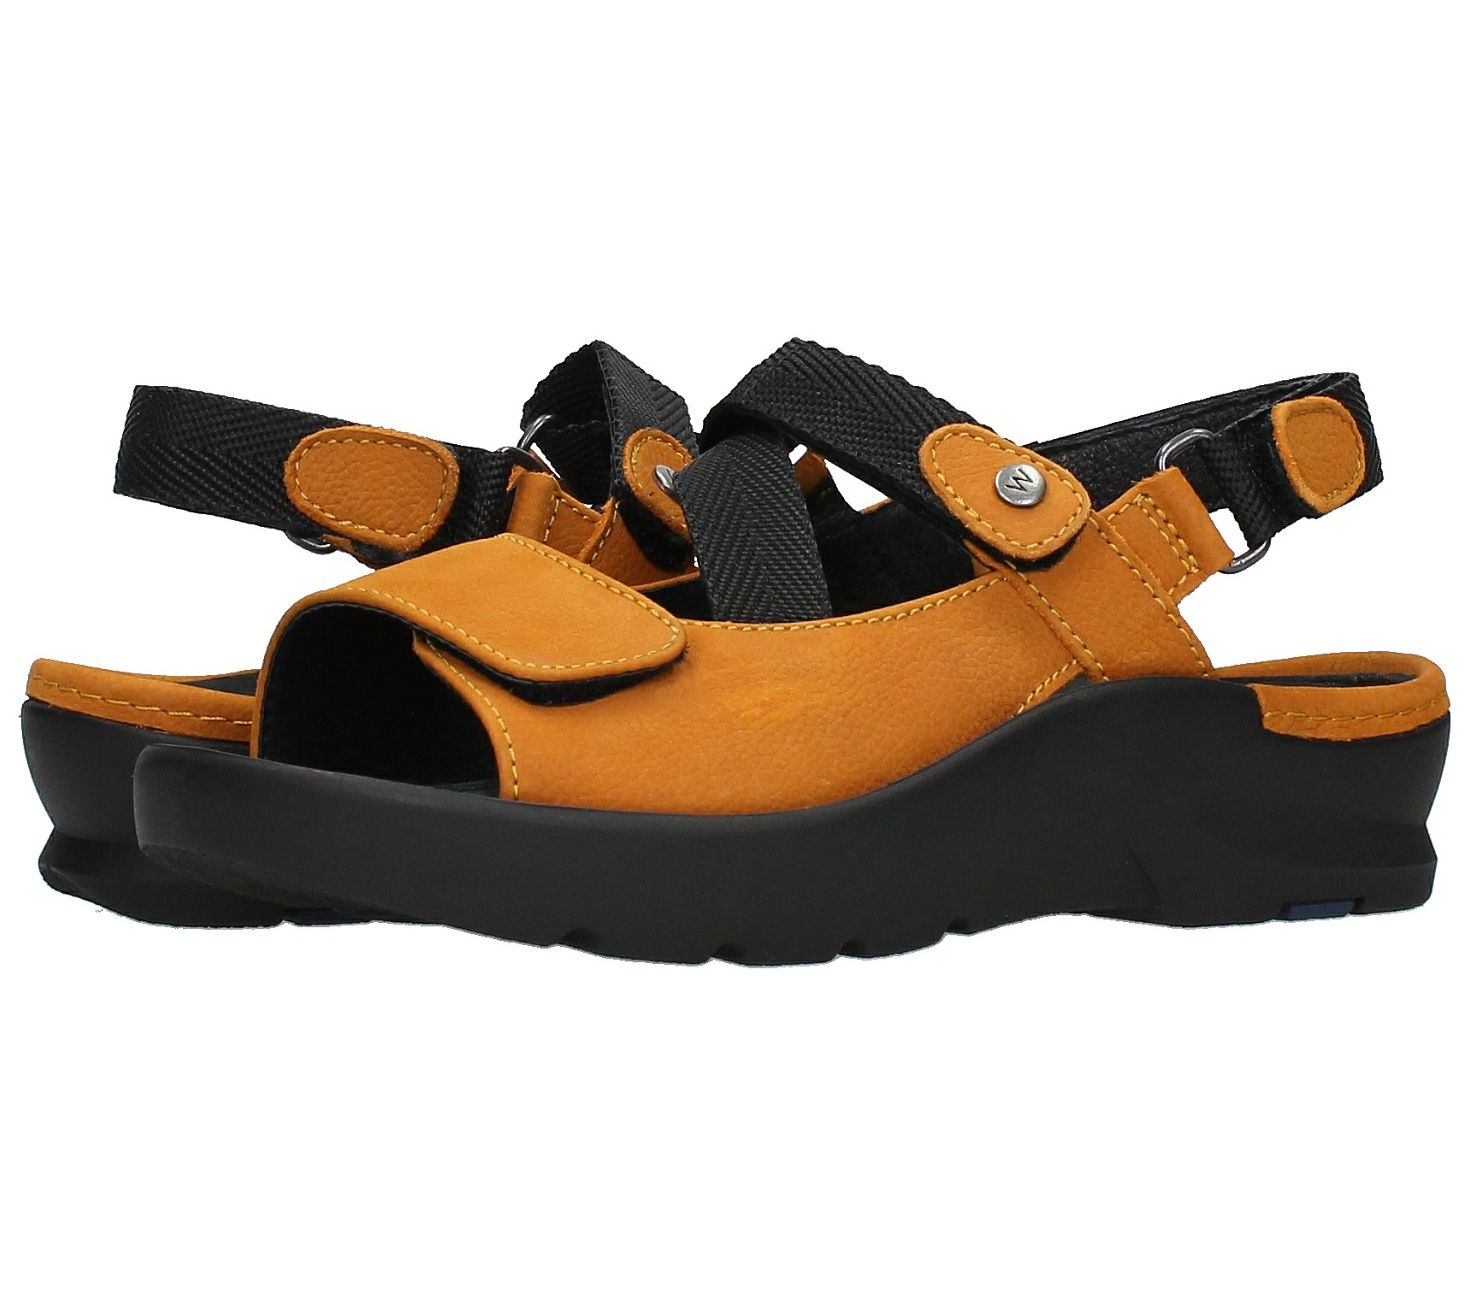 Wolky Nubuck Leather Sandals Lisse - QVC.com